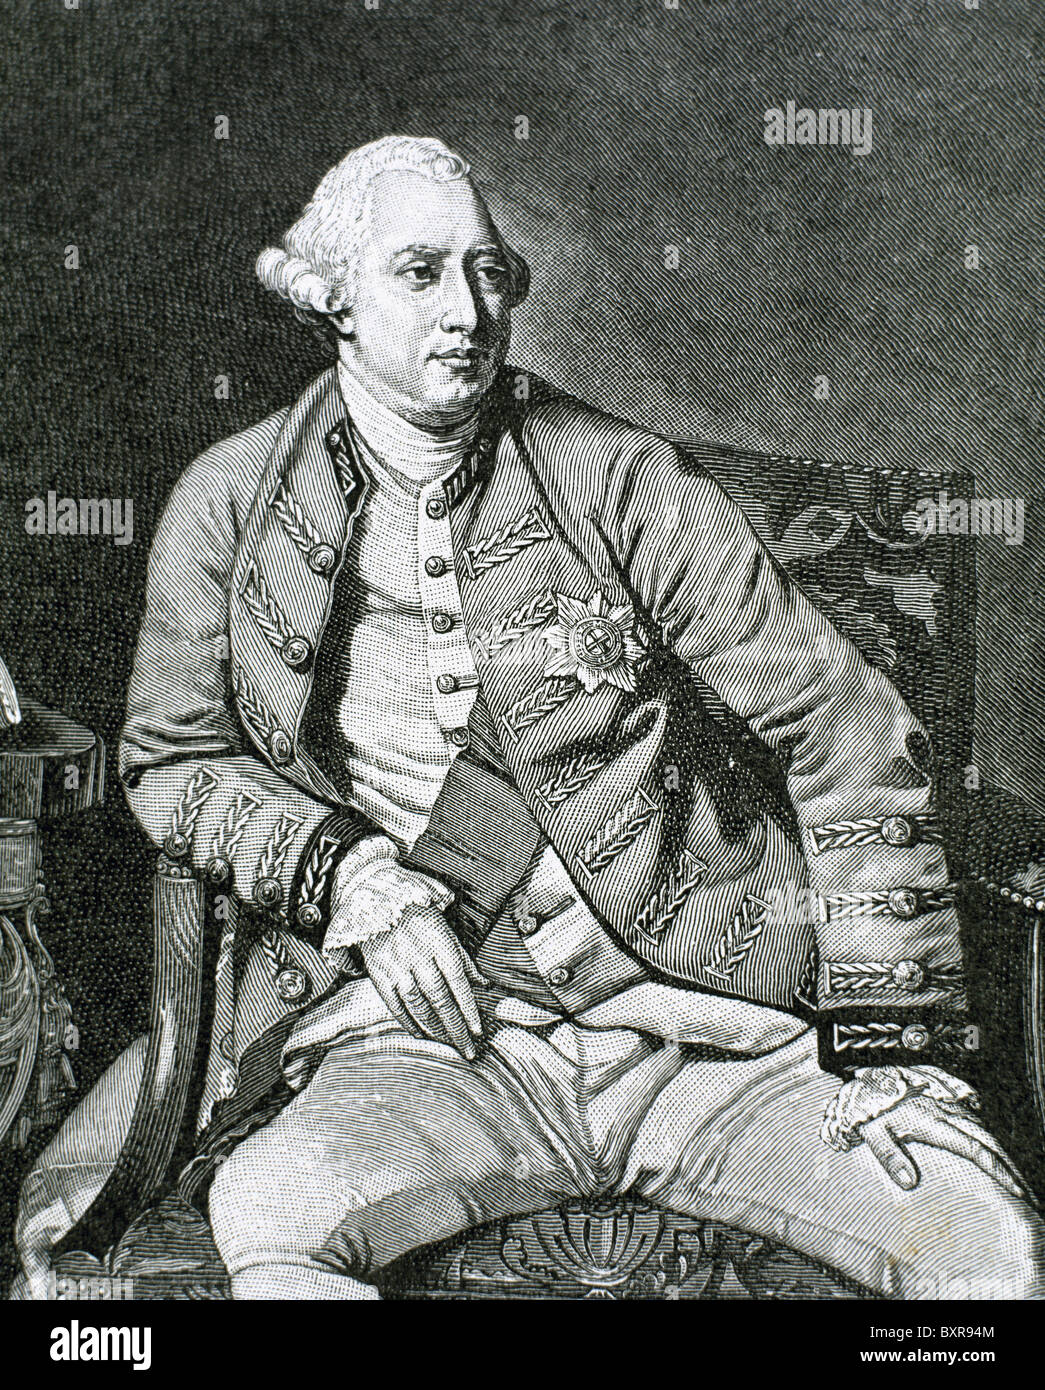 George III (London ,1738-Windsor, 1820). King of Great Britain and Ireland (1760-1820), elector (1760-1814) and king of Hanover. Stock Photo